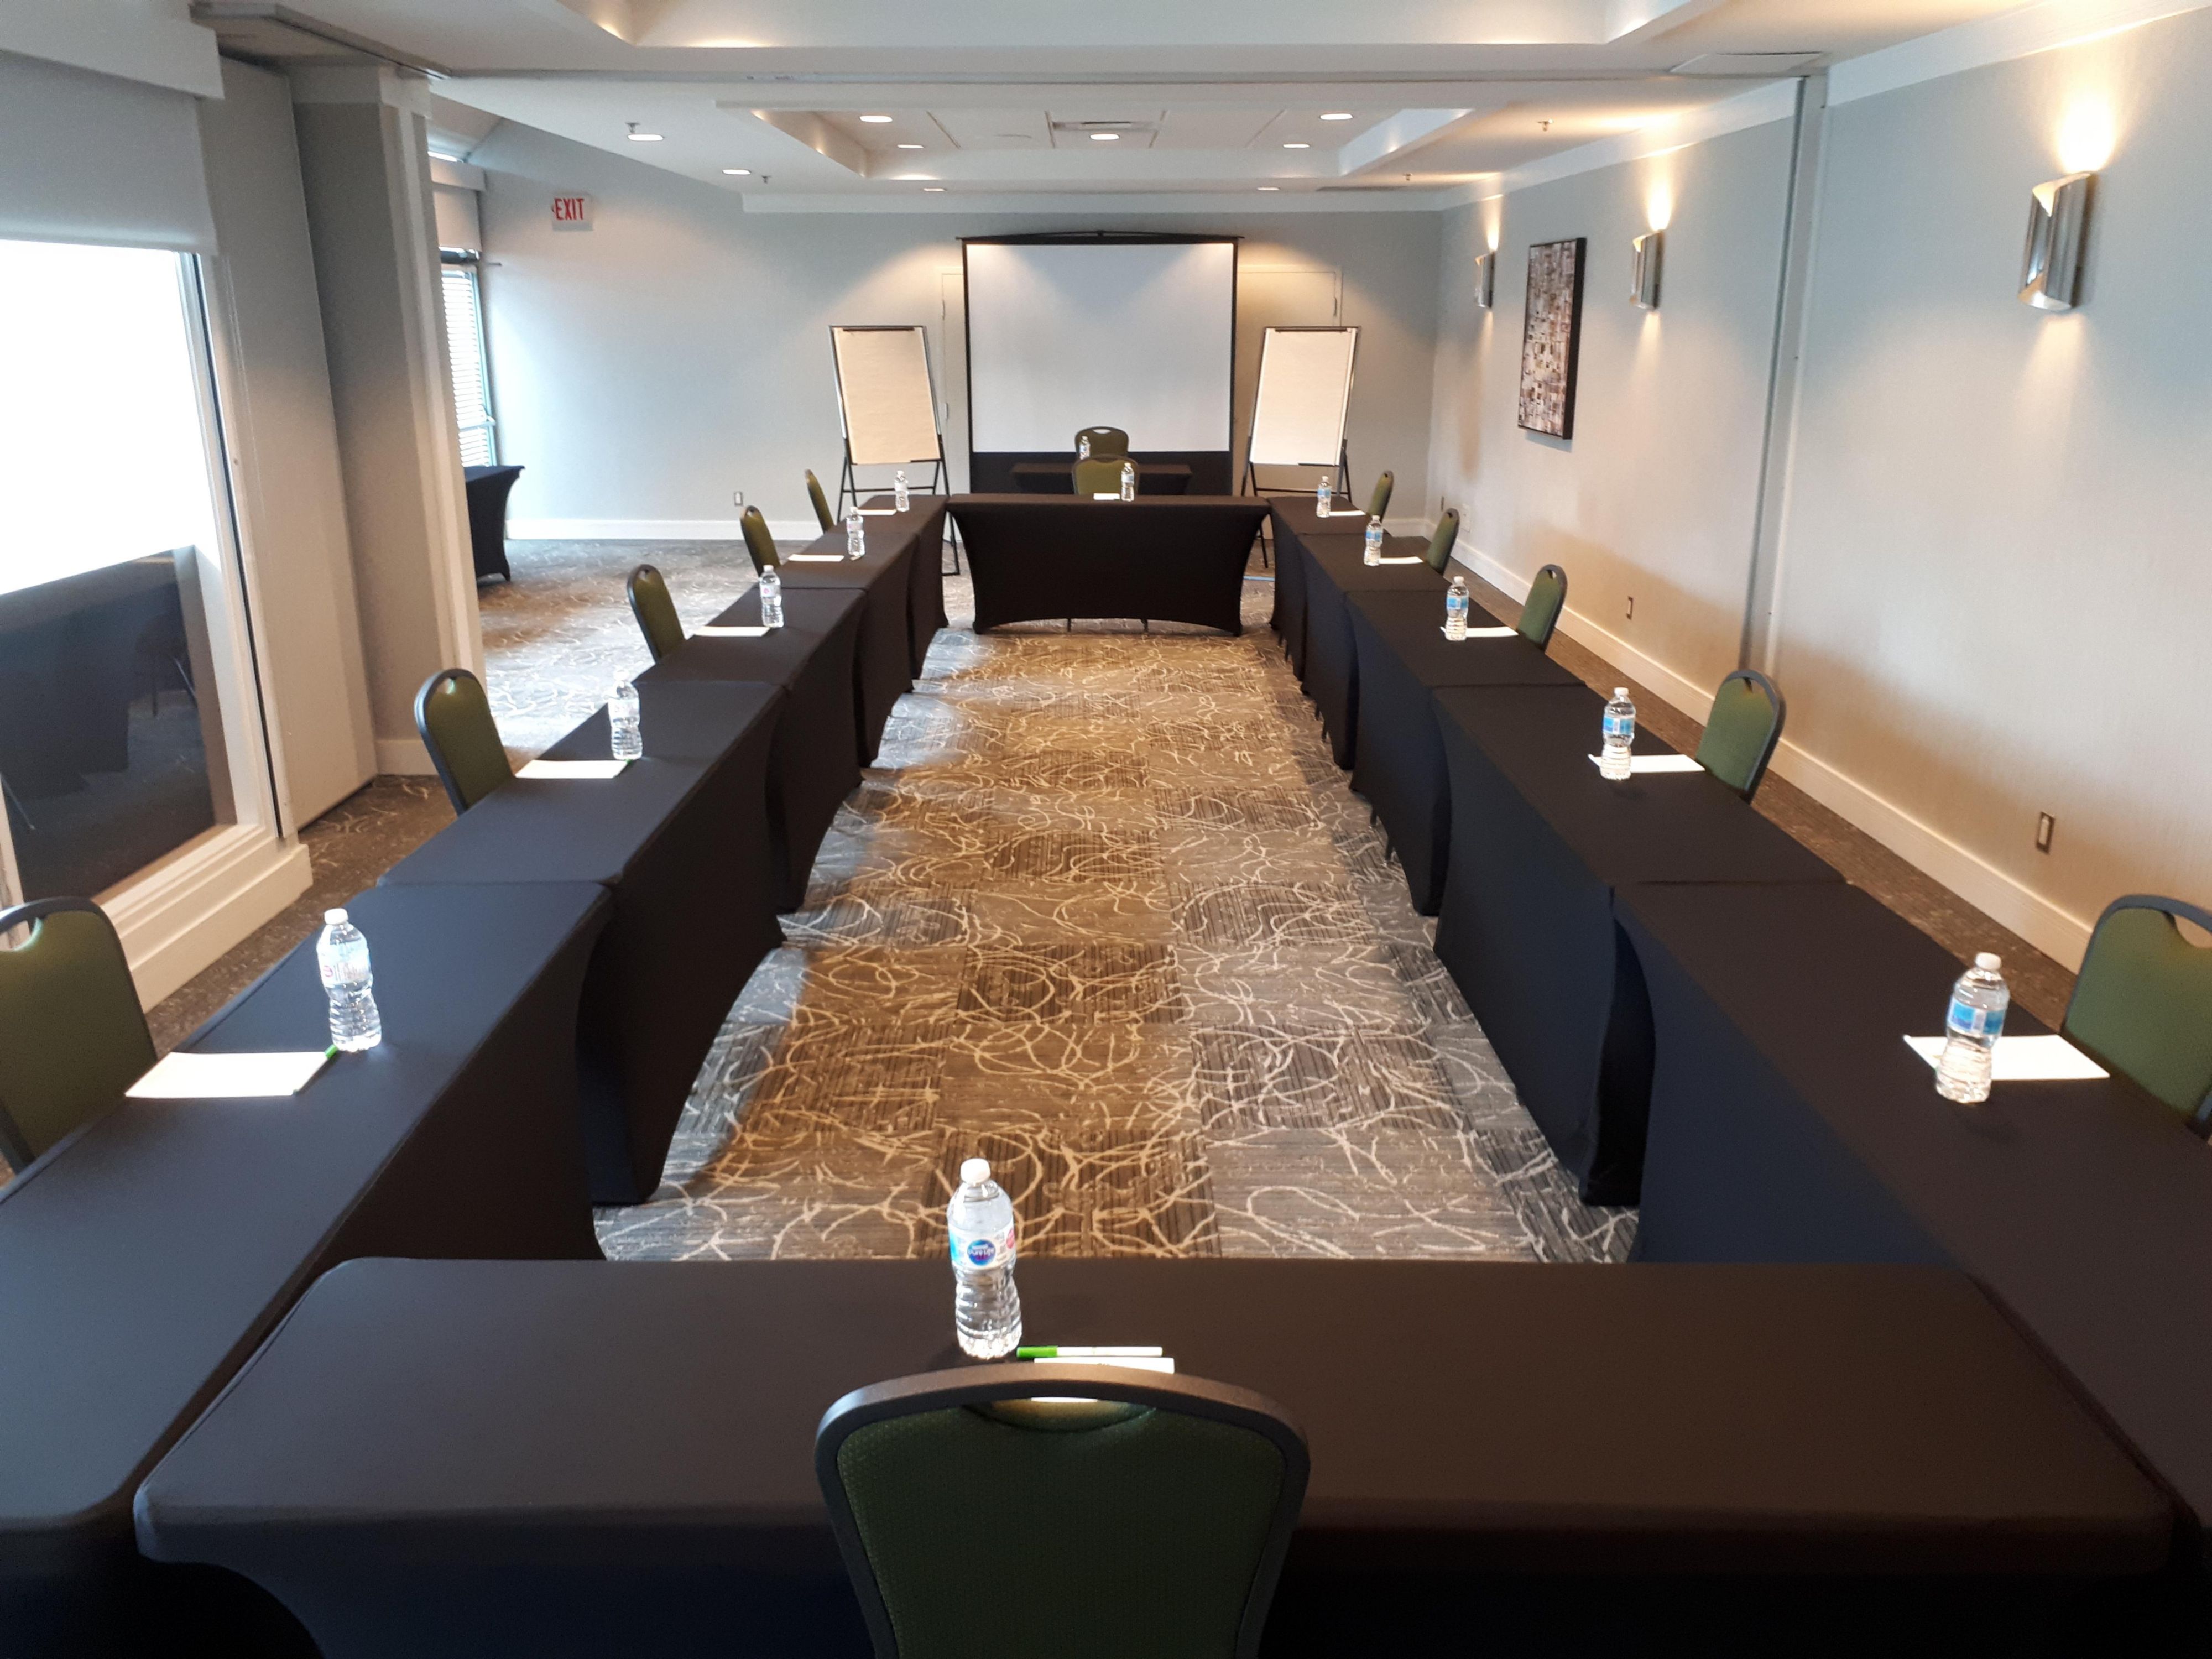 Need a meeting room? The Holiday Inn Vancouver Airport offers meeting rooms to accommodate your meeting room requests. Please call 604-207-3185 or email catering@hiyvr.com for a quote.  